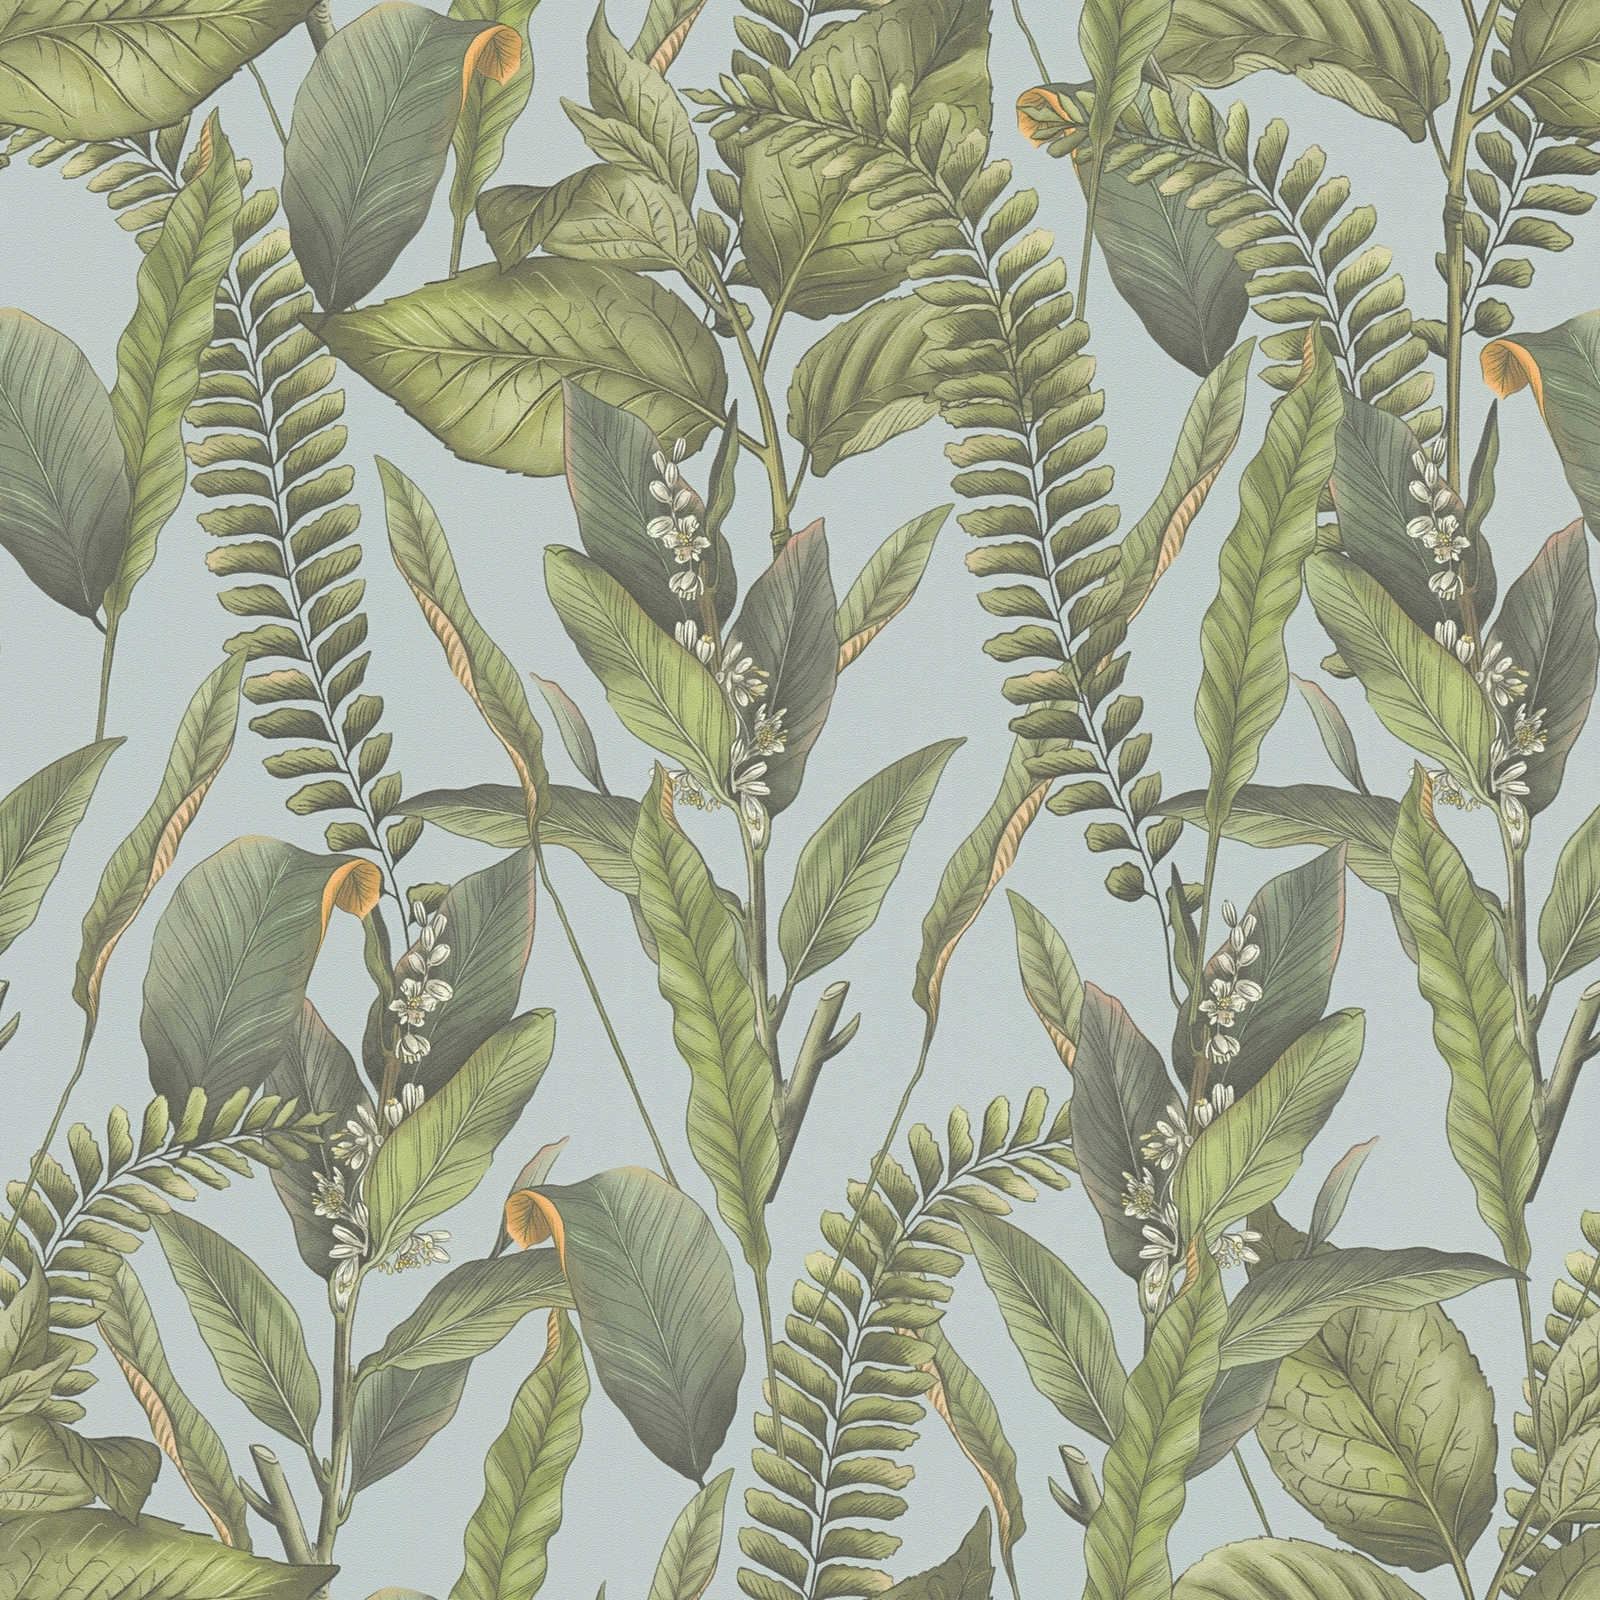 Floral wallpaper in jungle style with leaves & flowers textured matt - blue, green, orange
